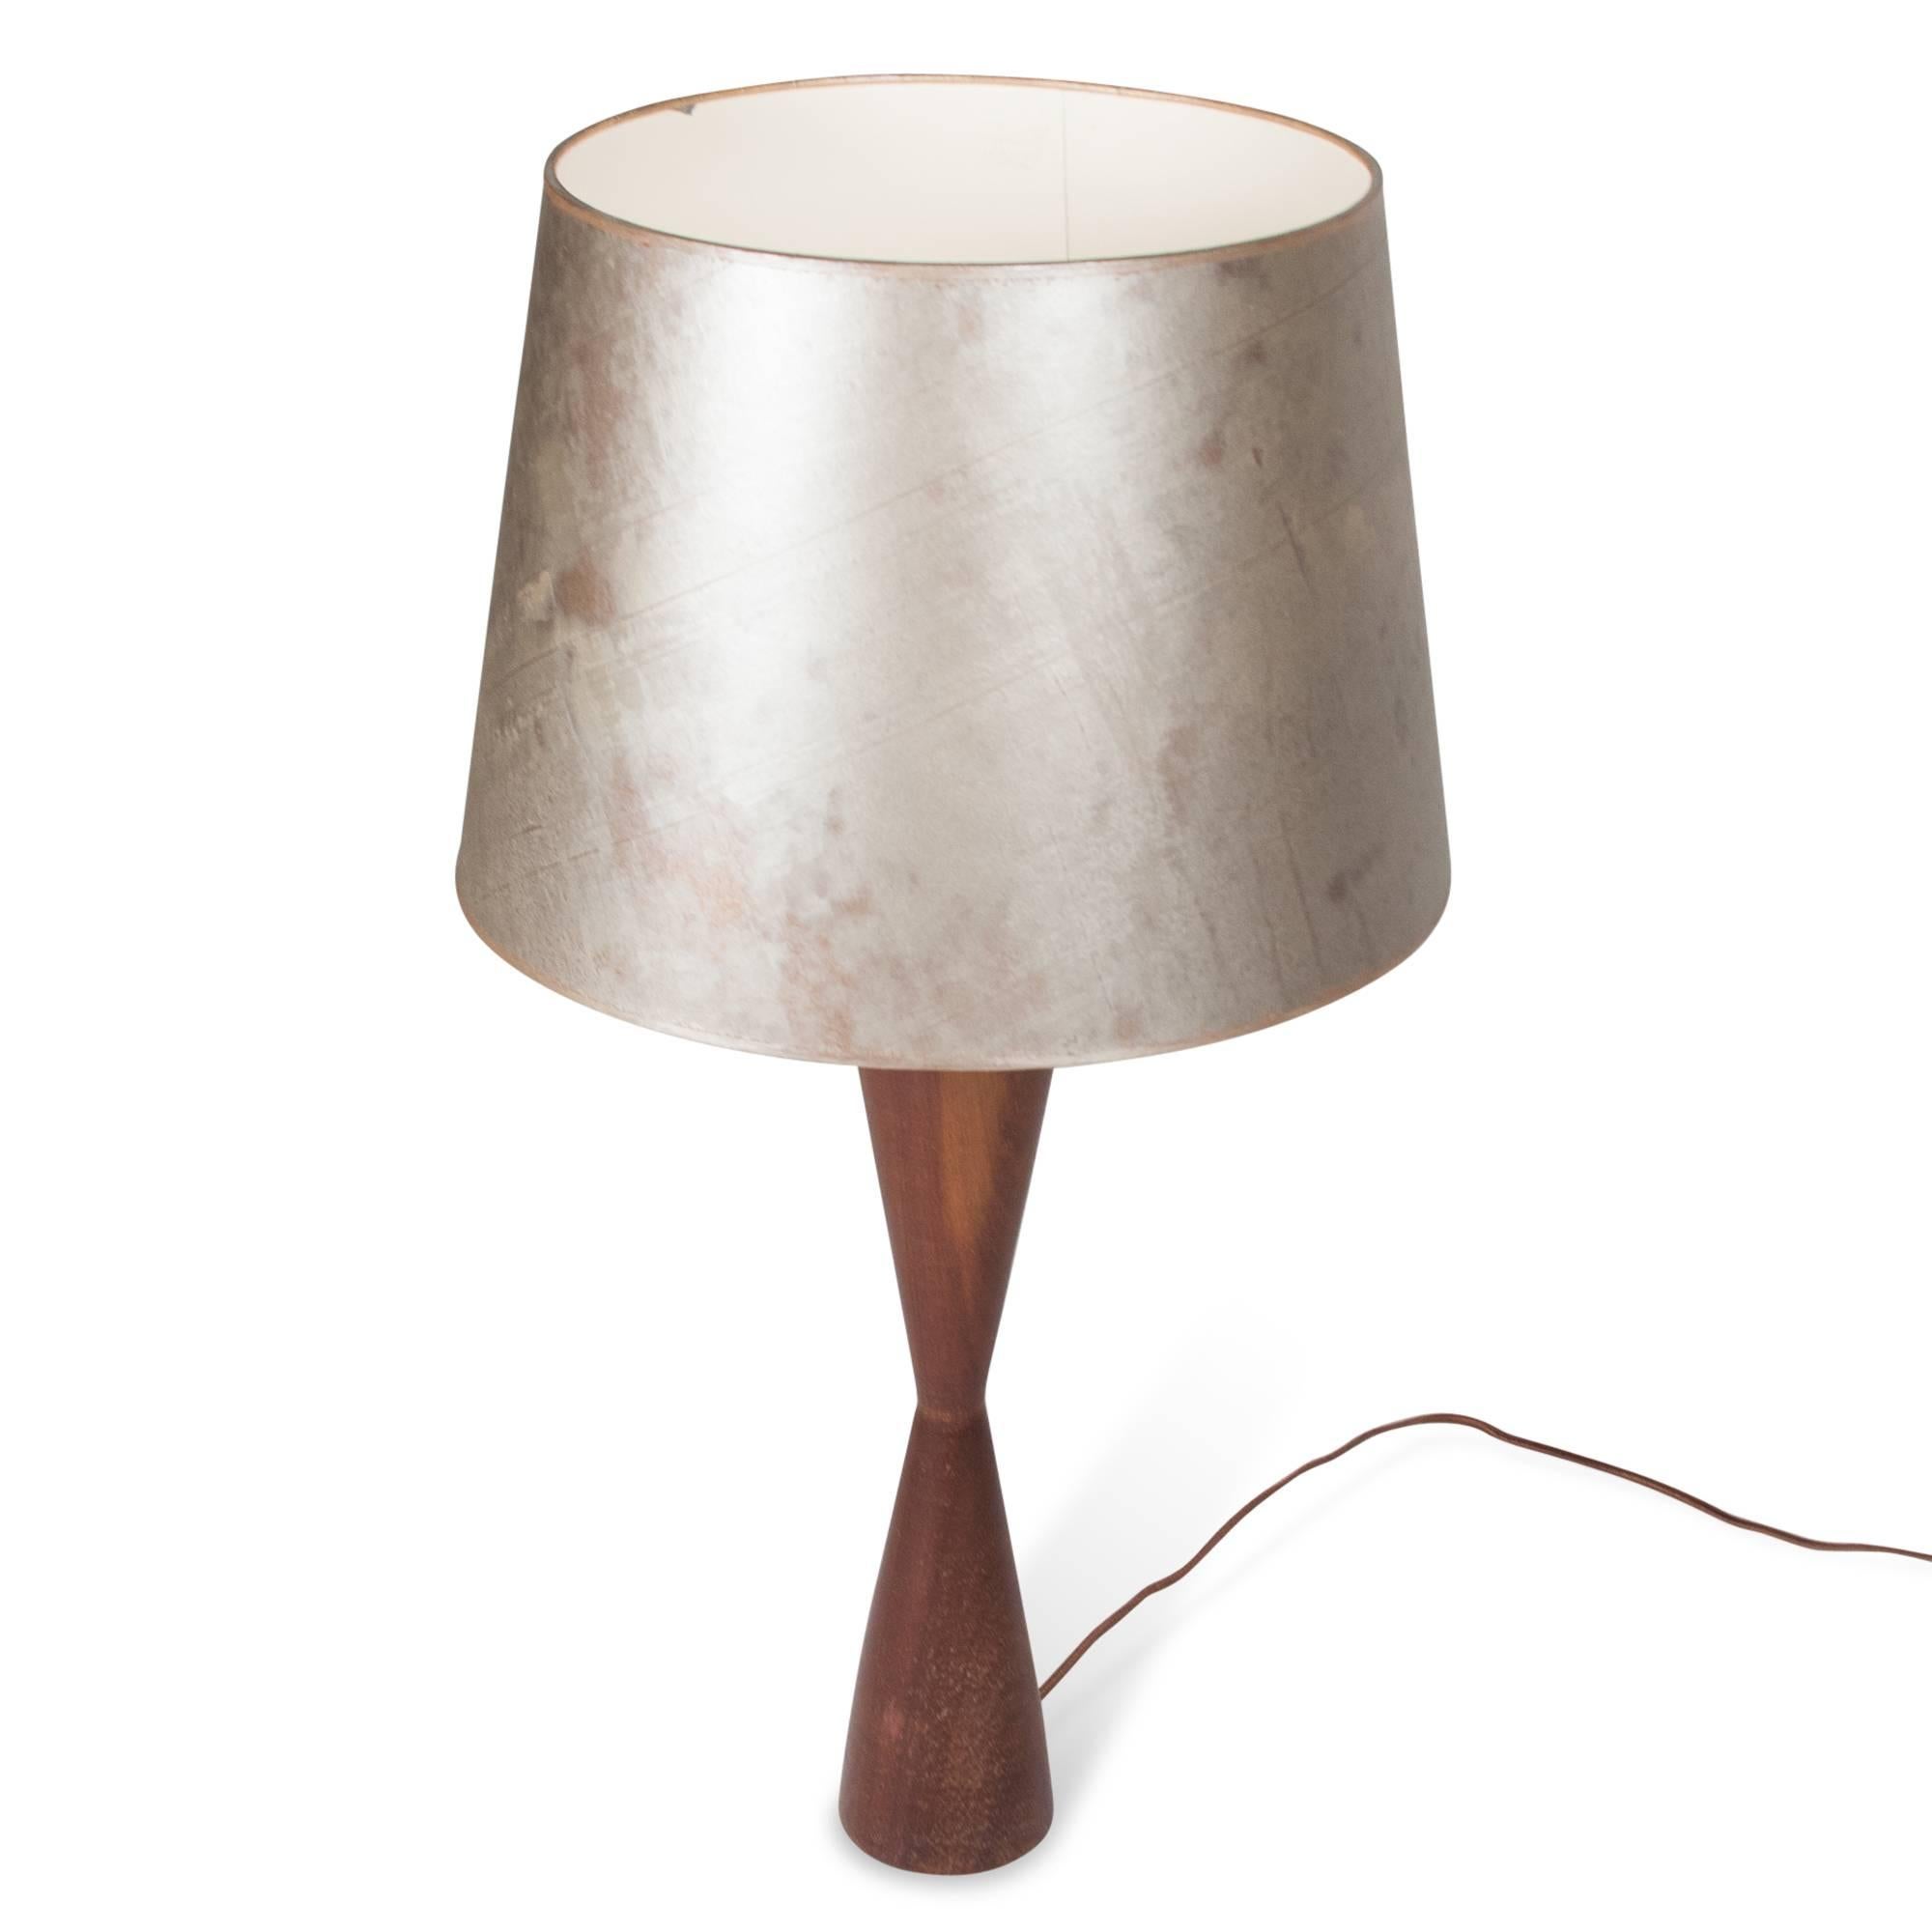 Mid-20th Century Turned Walnut Table Lamp, Danish, 1950s For Sale